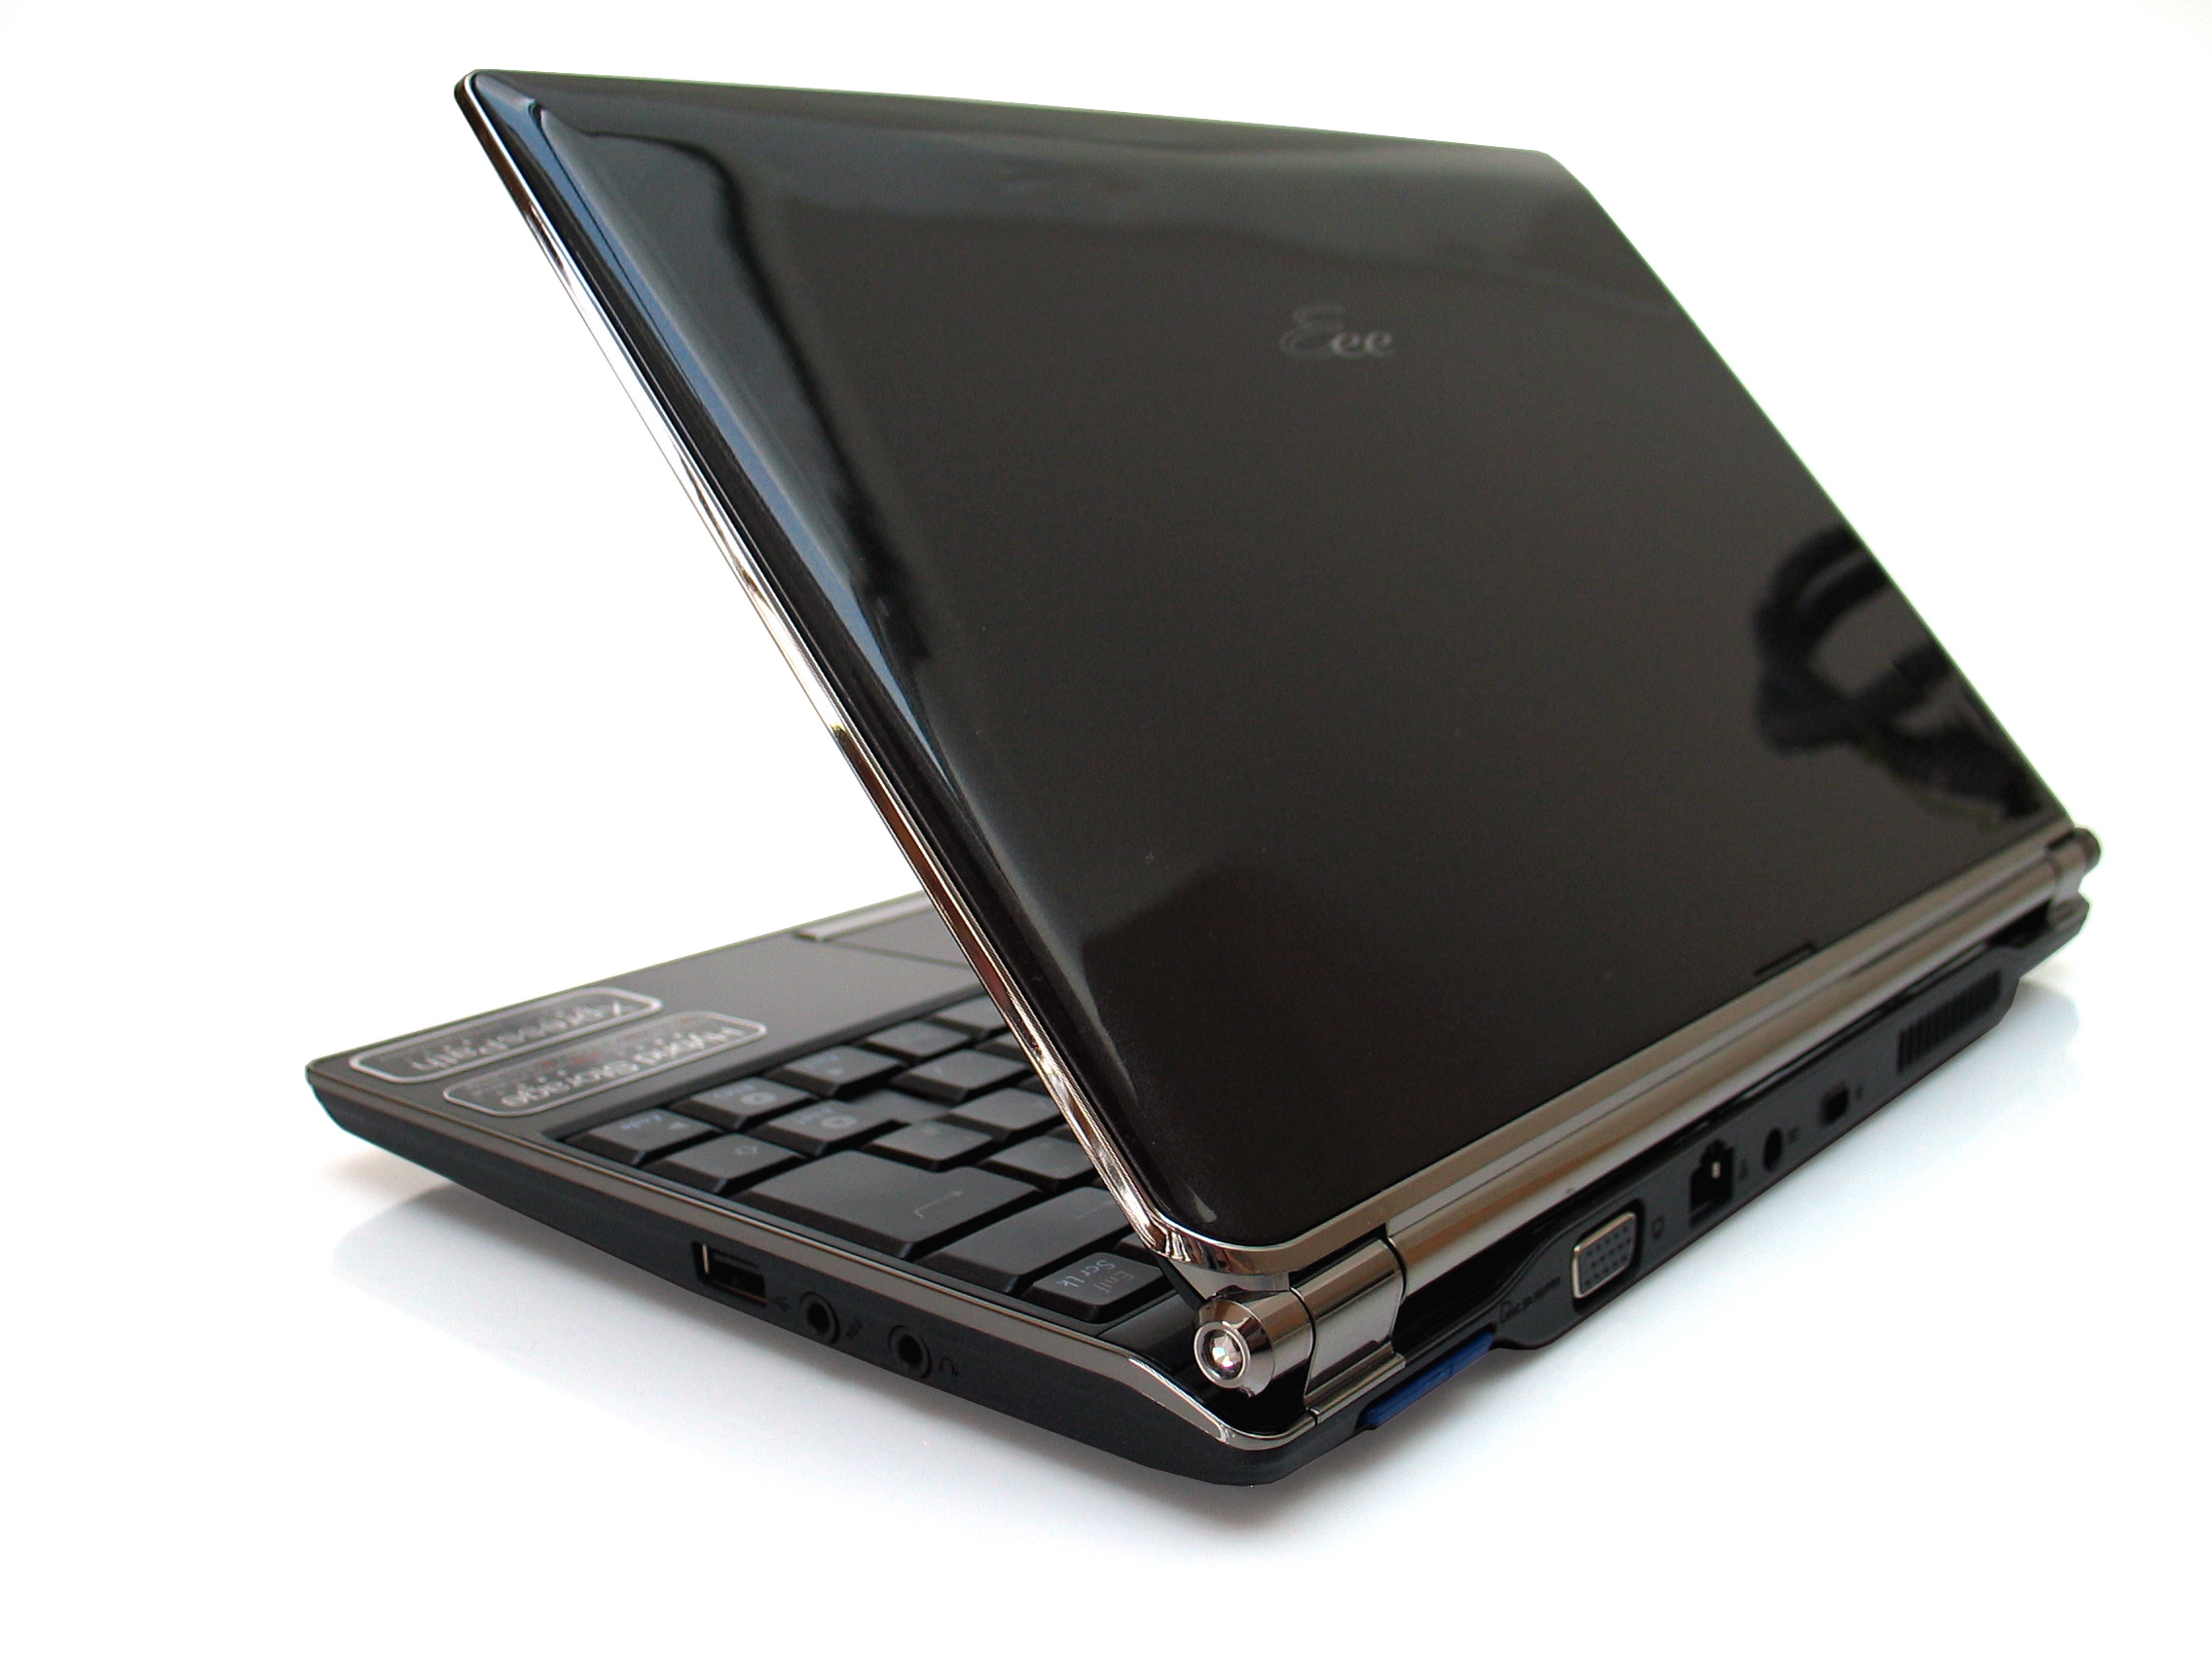 Asus Eee PC S101 - Notebookcheck.org